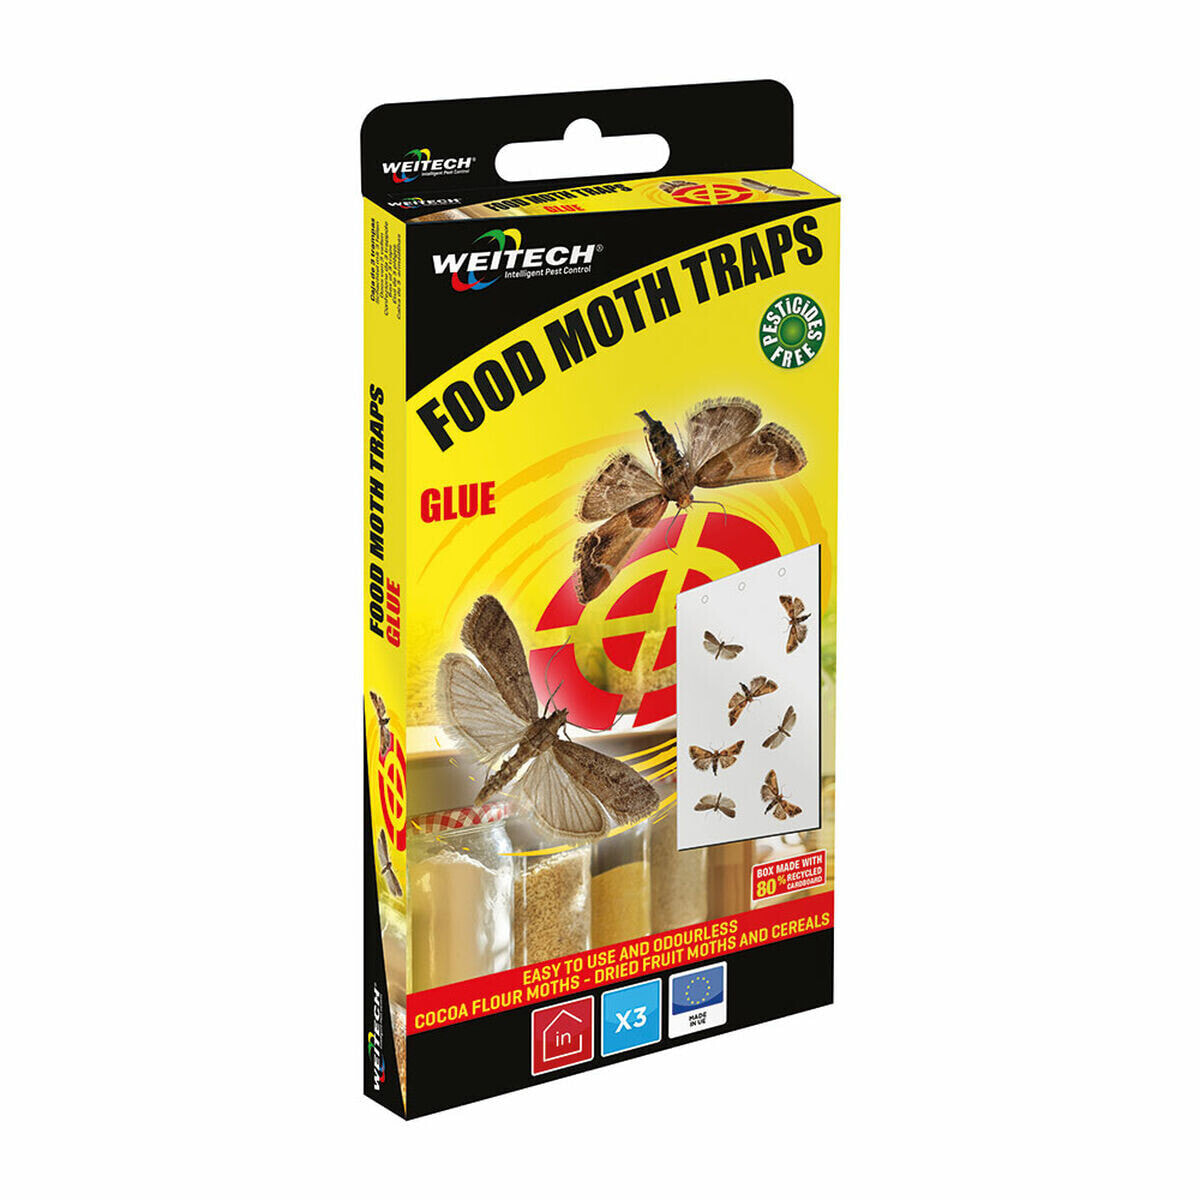 Insect trap Weitech Moths 3 Units